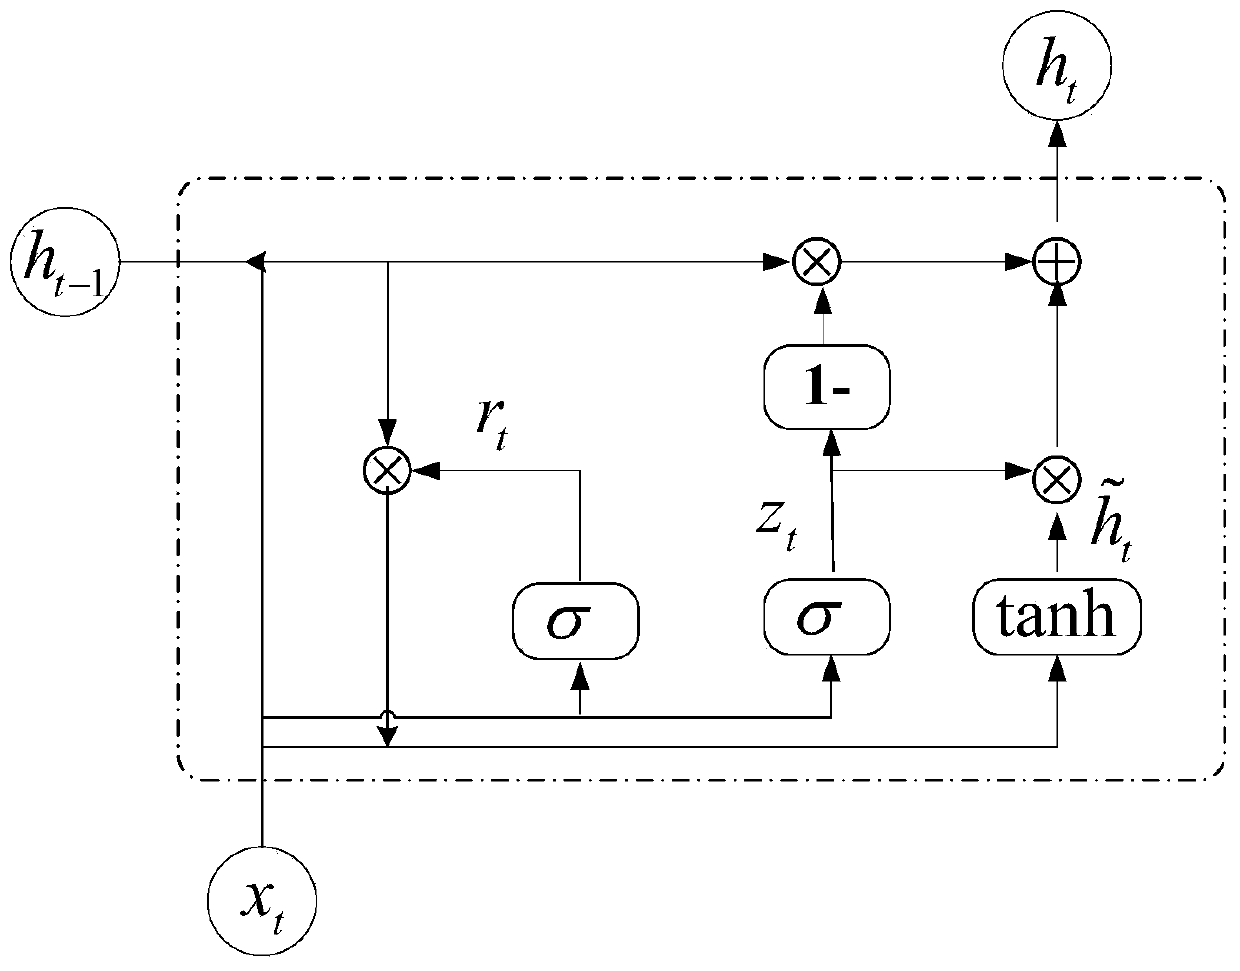 Online trajectory prediction method based on particle filtering